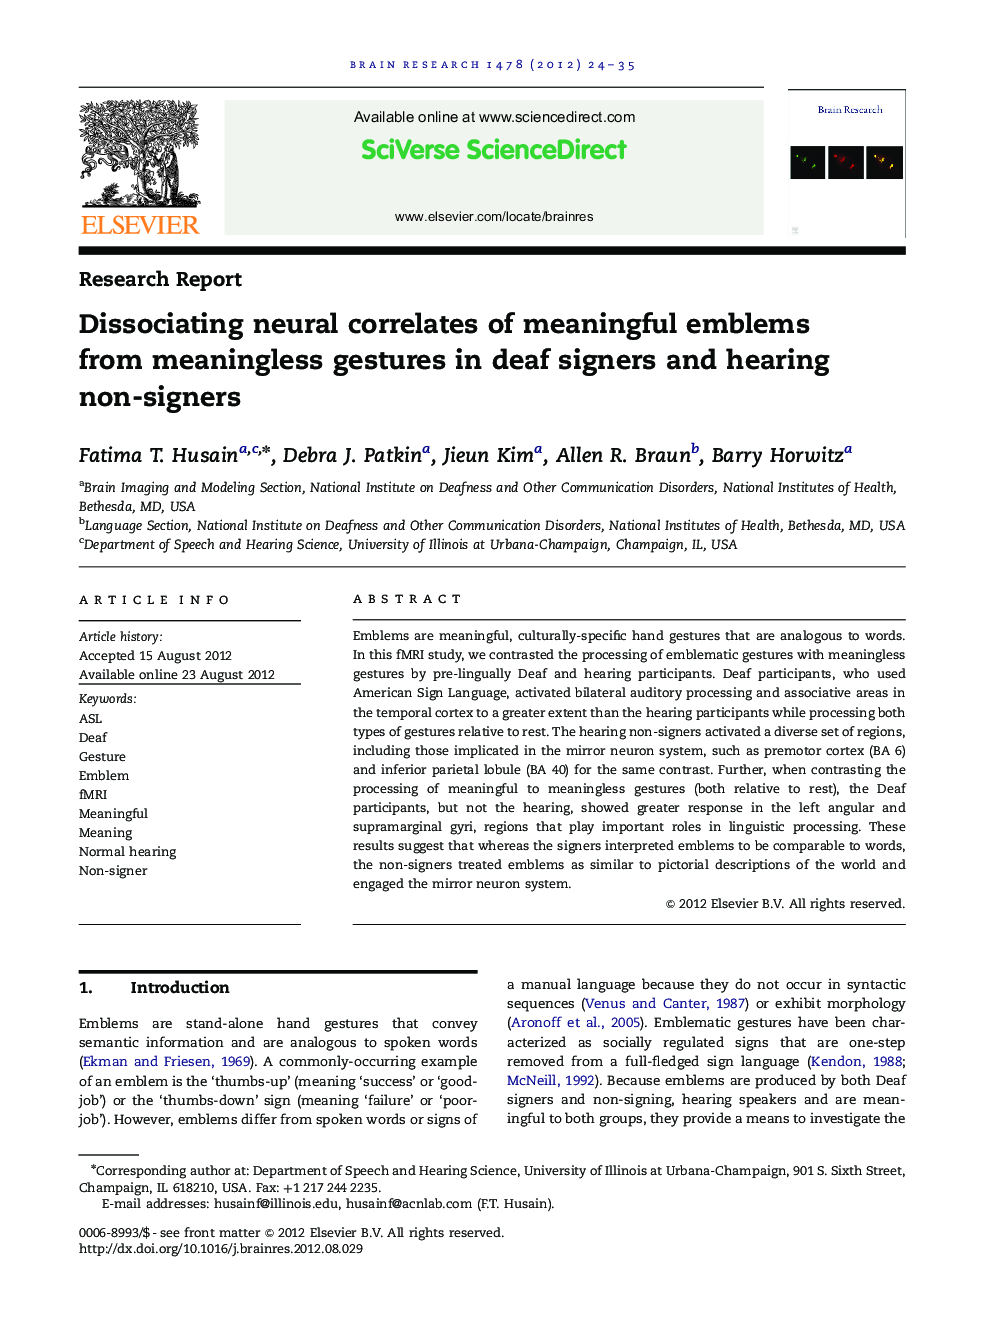 Dissociating neural correlates of meaningful emblems from meaningless gestures in deaf signers and hearing non-signers